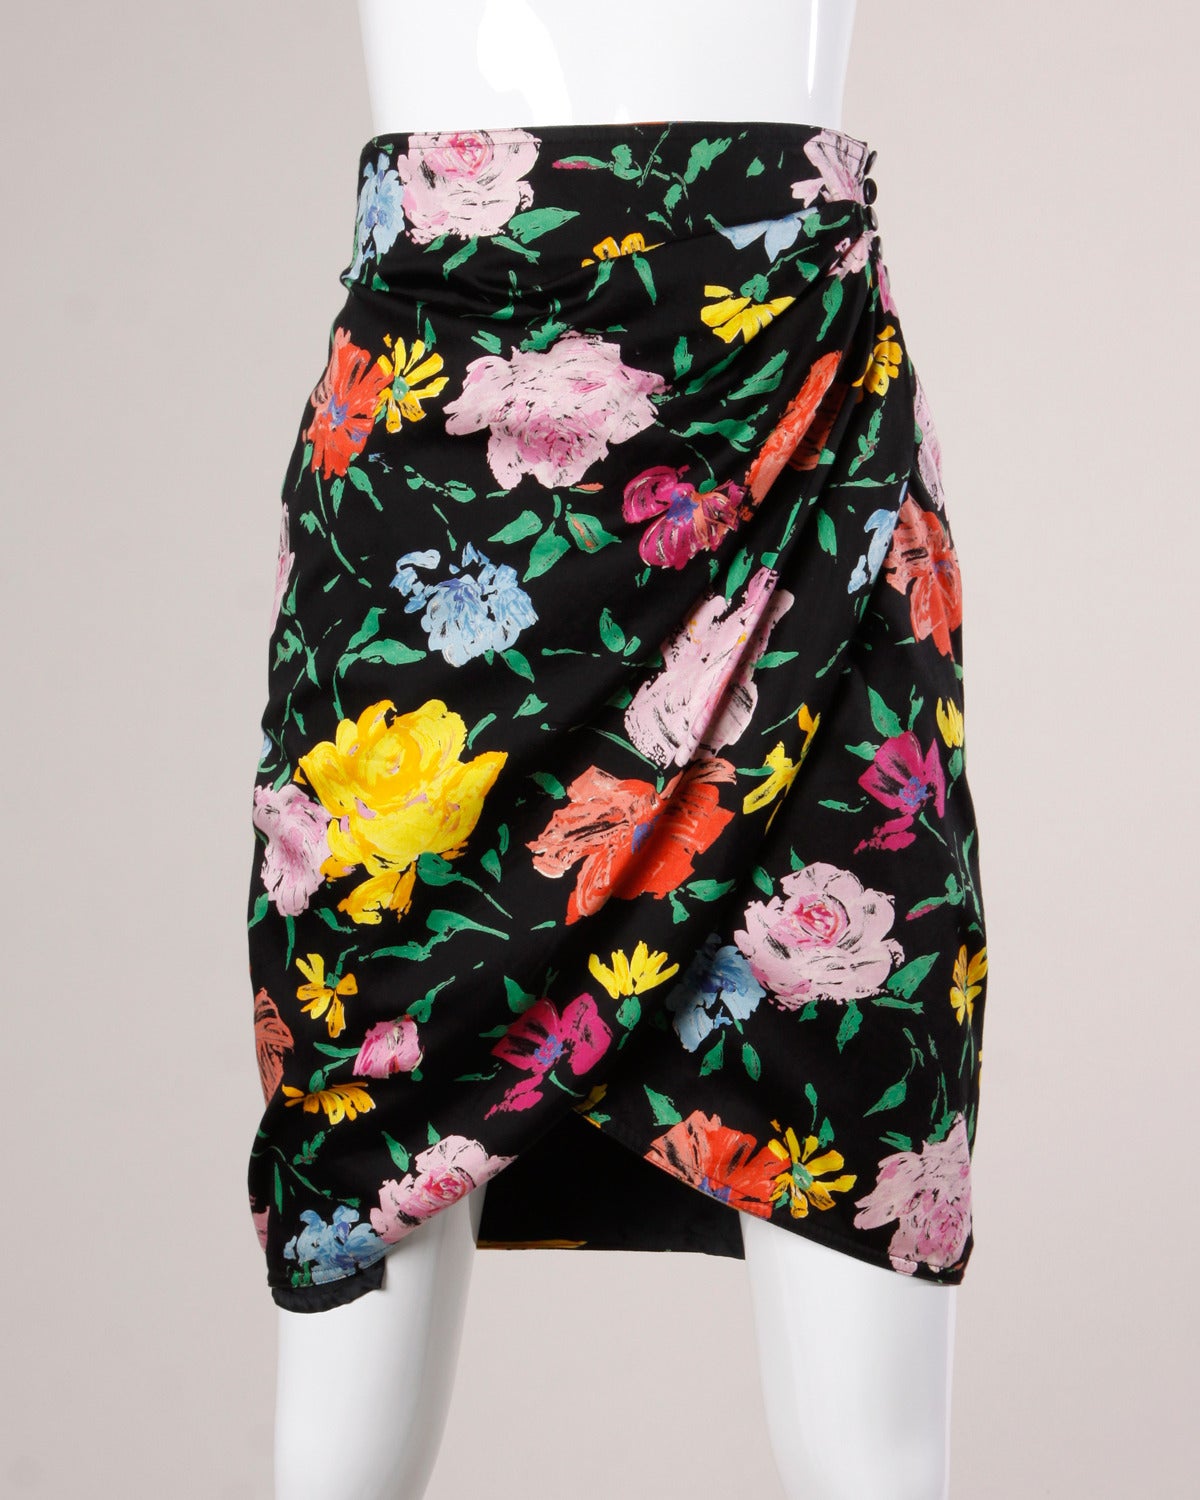 Vintage quilted jacket and skirt set by Emanuel Ungaro with a colorful floral print. Both pieces can be worn together or separately!

Details:

Fully Lined
Front Snap Closure On Jacket
Side Button and Clasp Closure On Skirt
Marked Skirt Size: